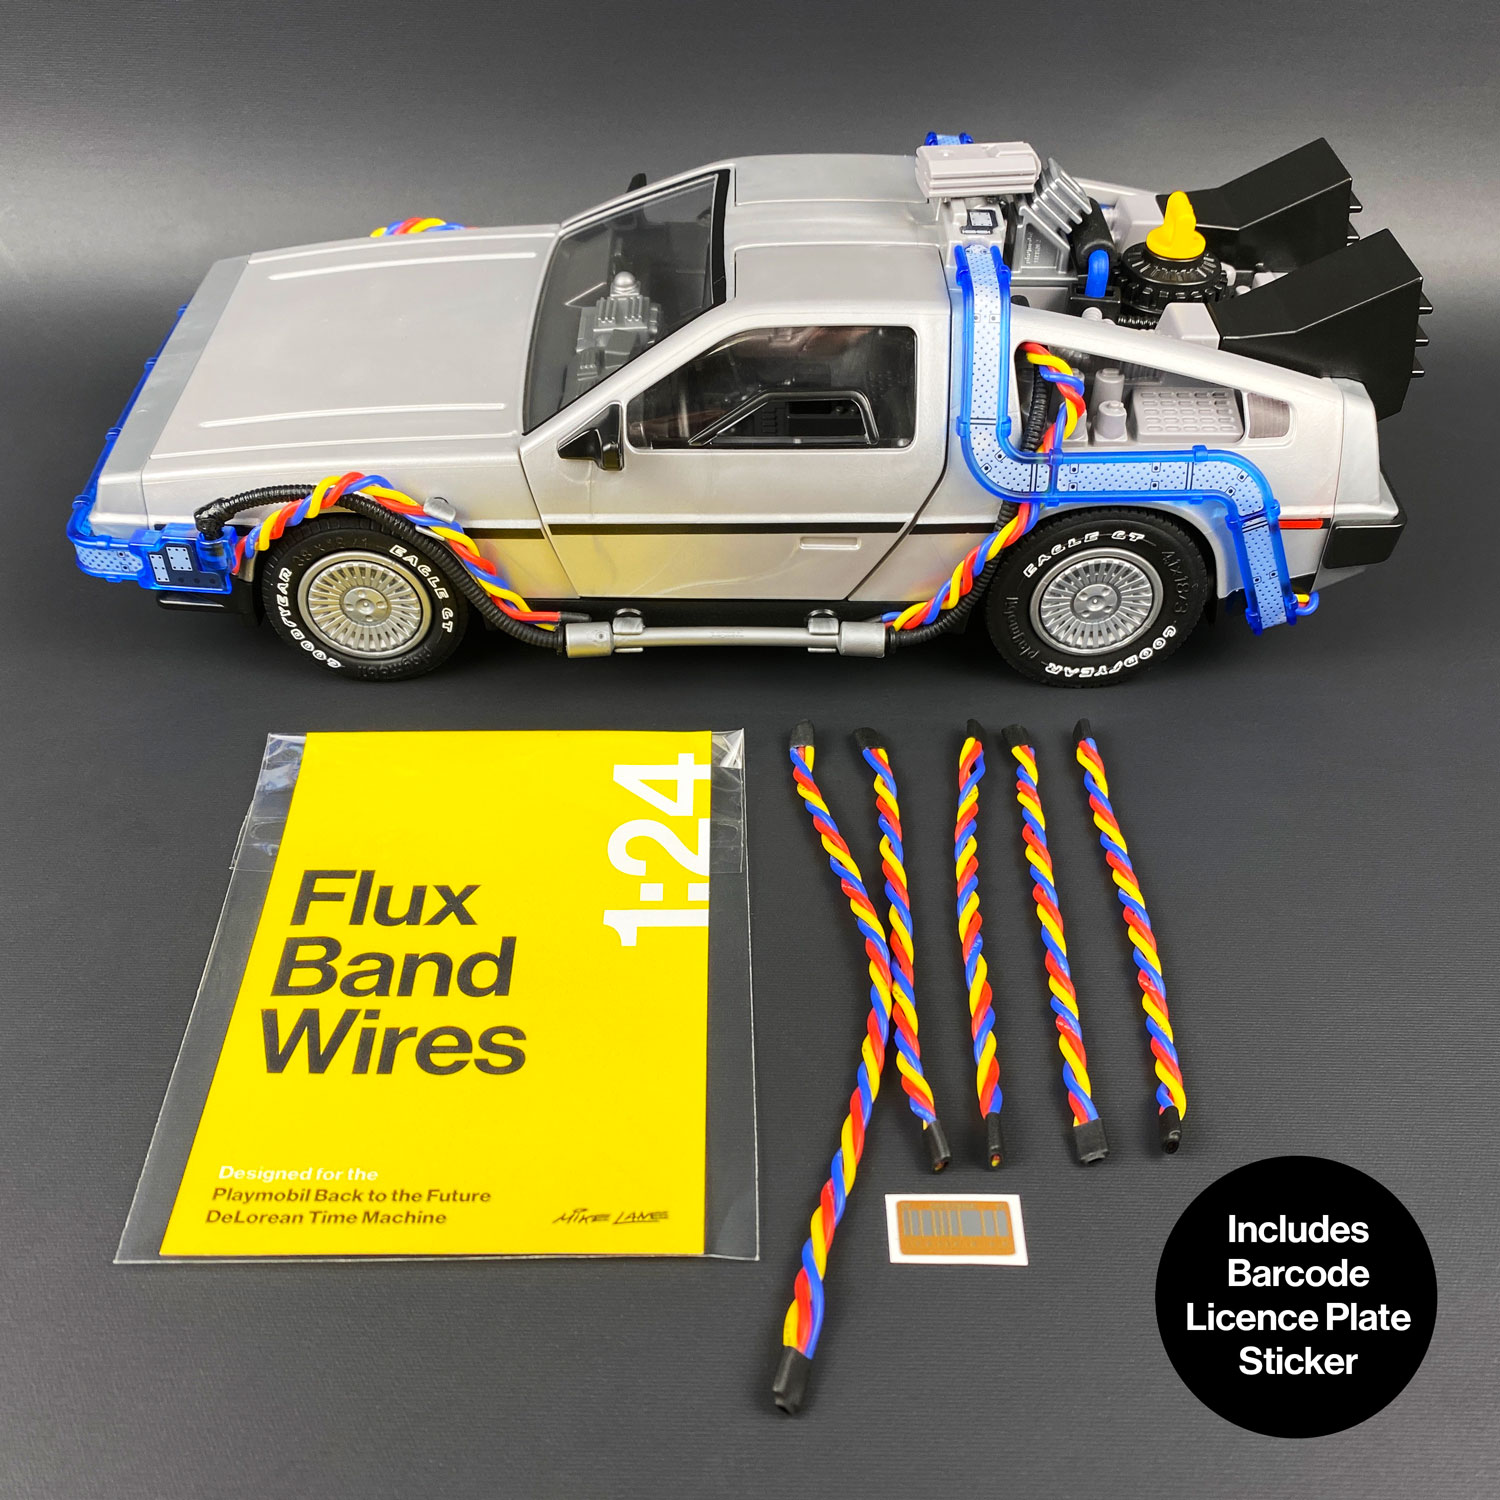 Flux Band Wires mod for Playmobil DeLorean model